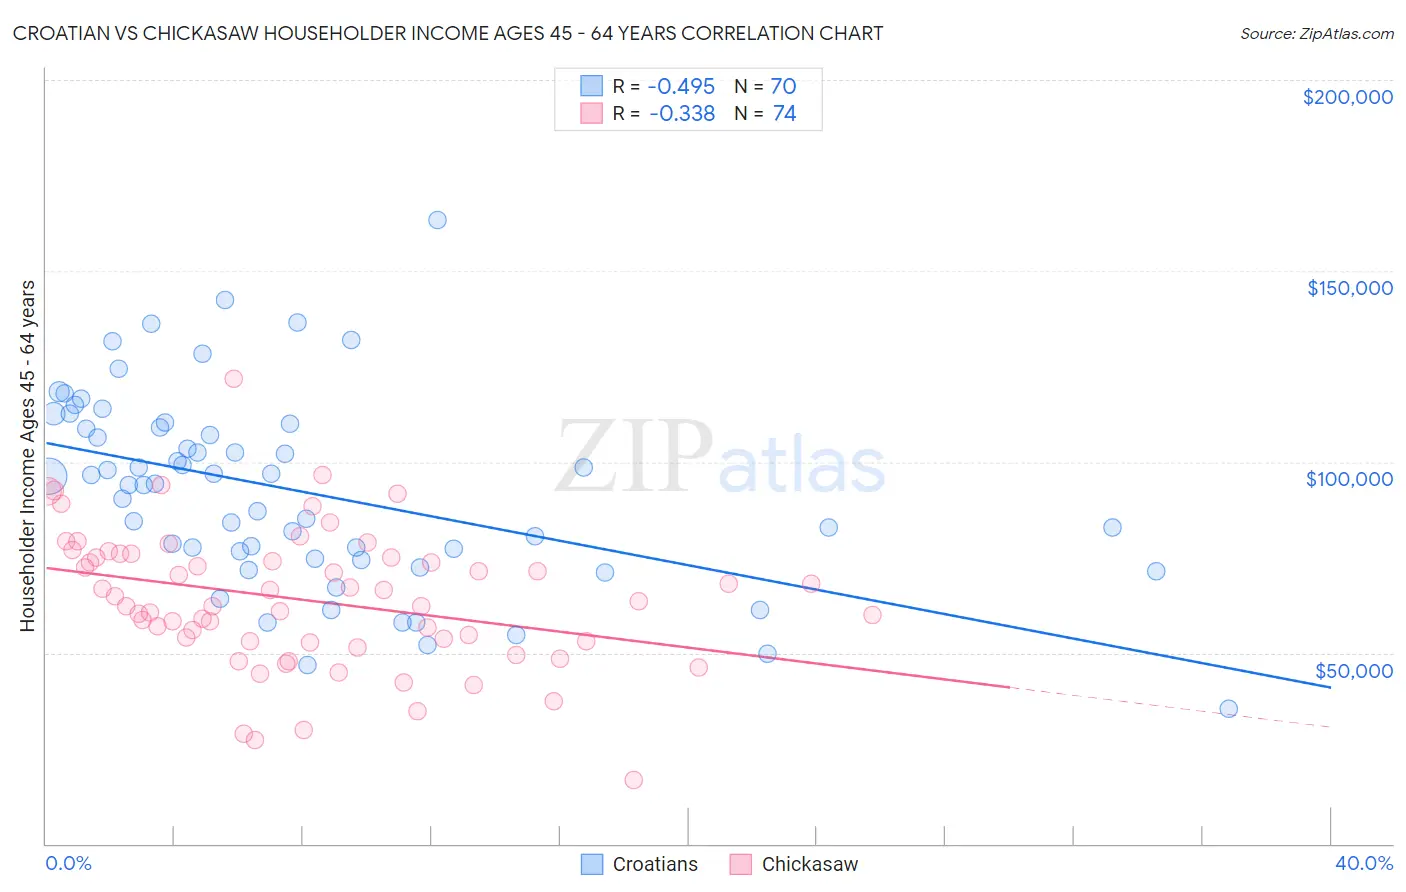 Croatian vs Chickasaw Householder Income Ages 45 - 64 years